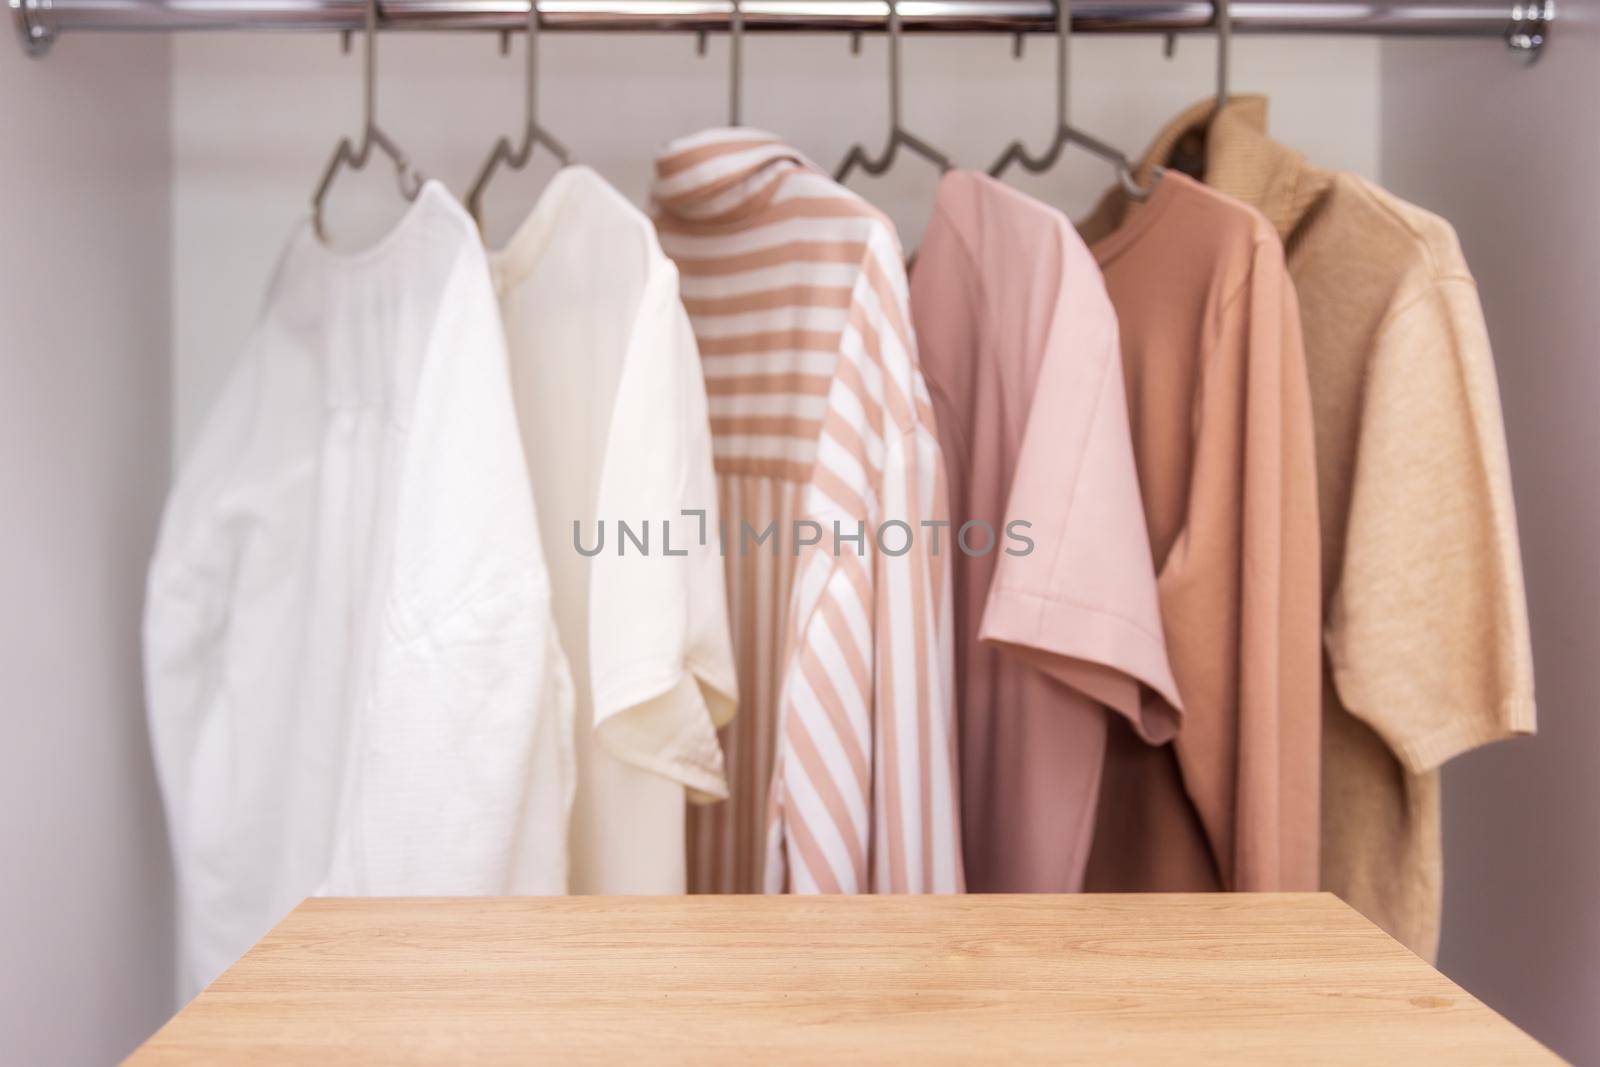 Stylist fashion wardrobe in neutral beige tones. Mockup for washing powder or bleach. Copy and paste space for text or your product. In the foreground is an empty, wooden table for product placement.